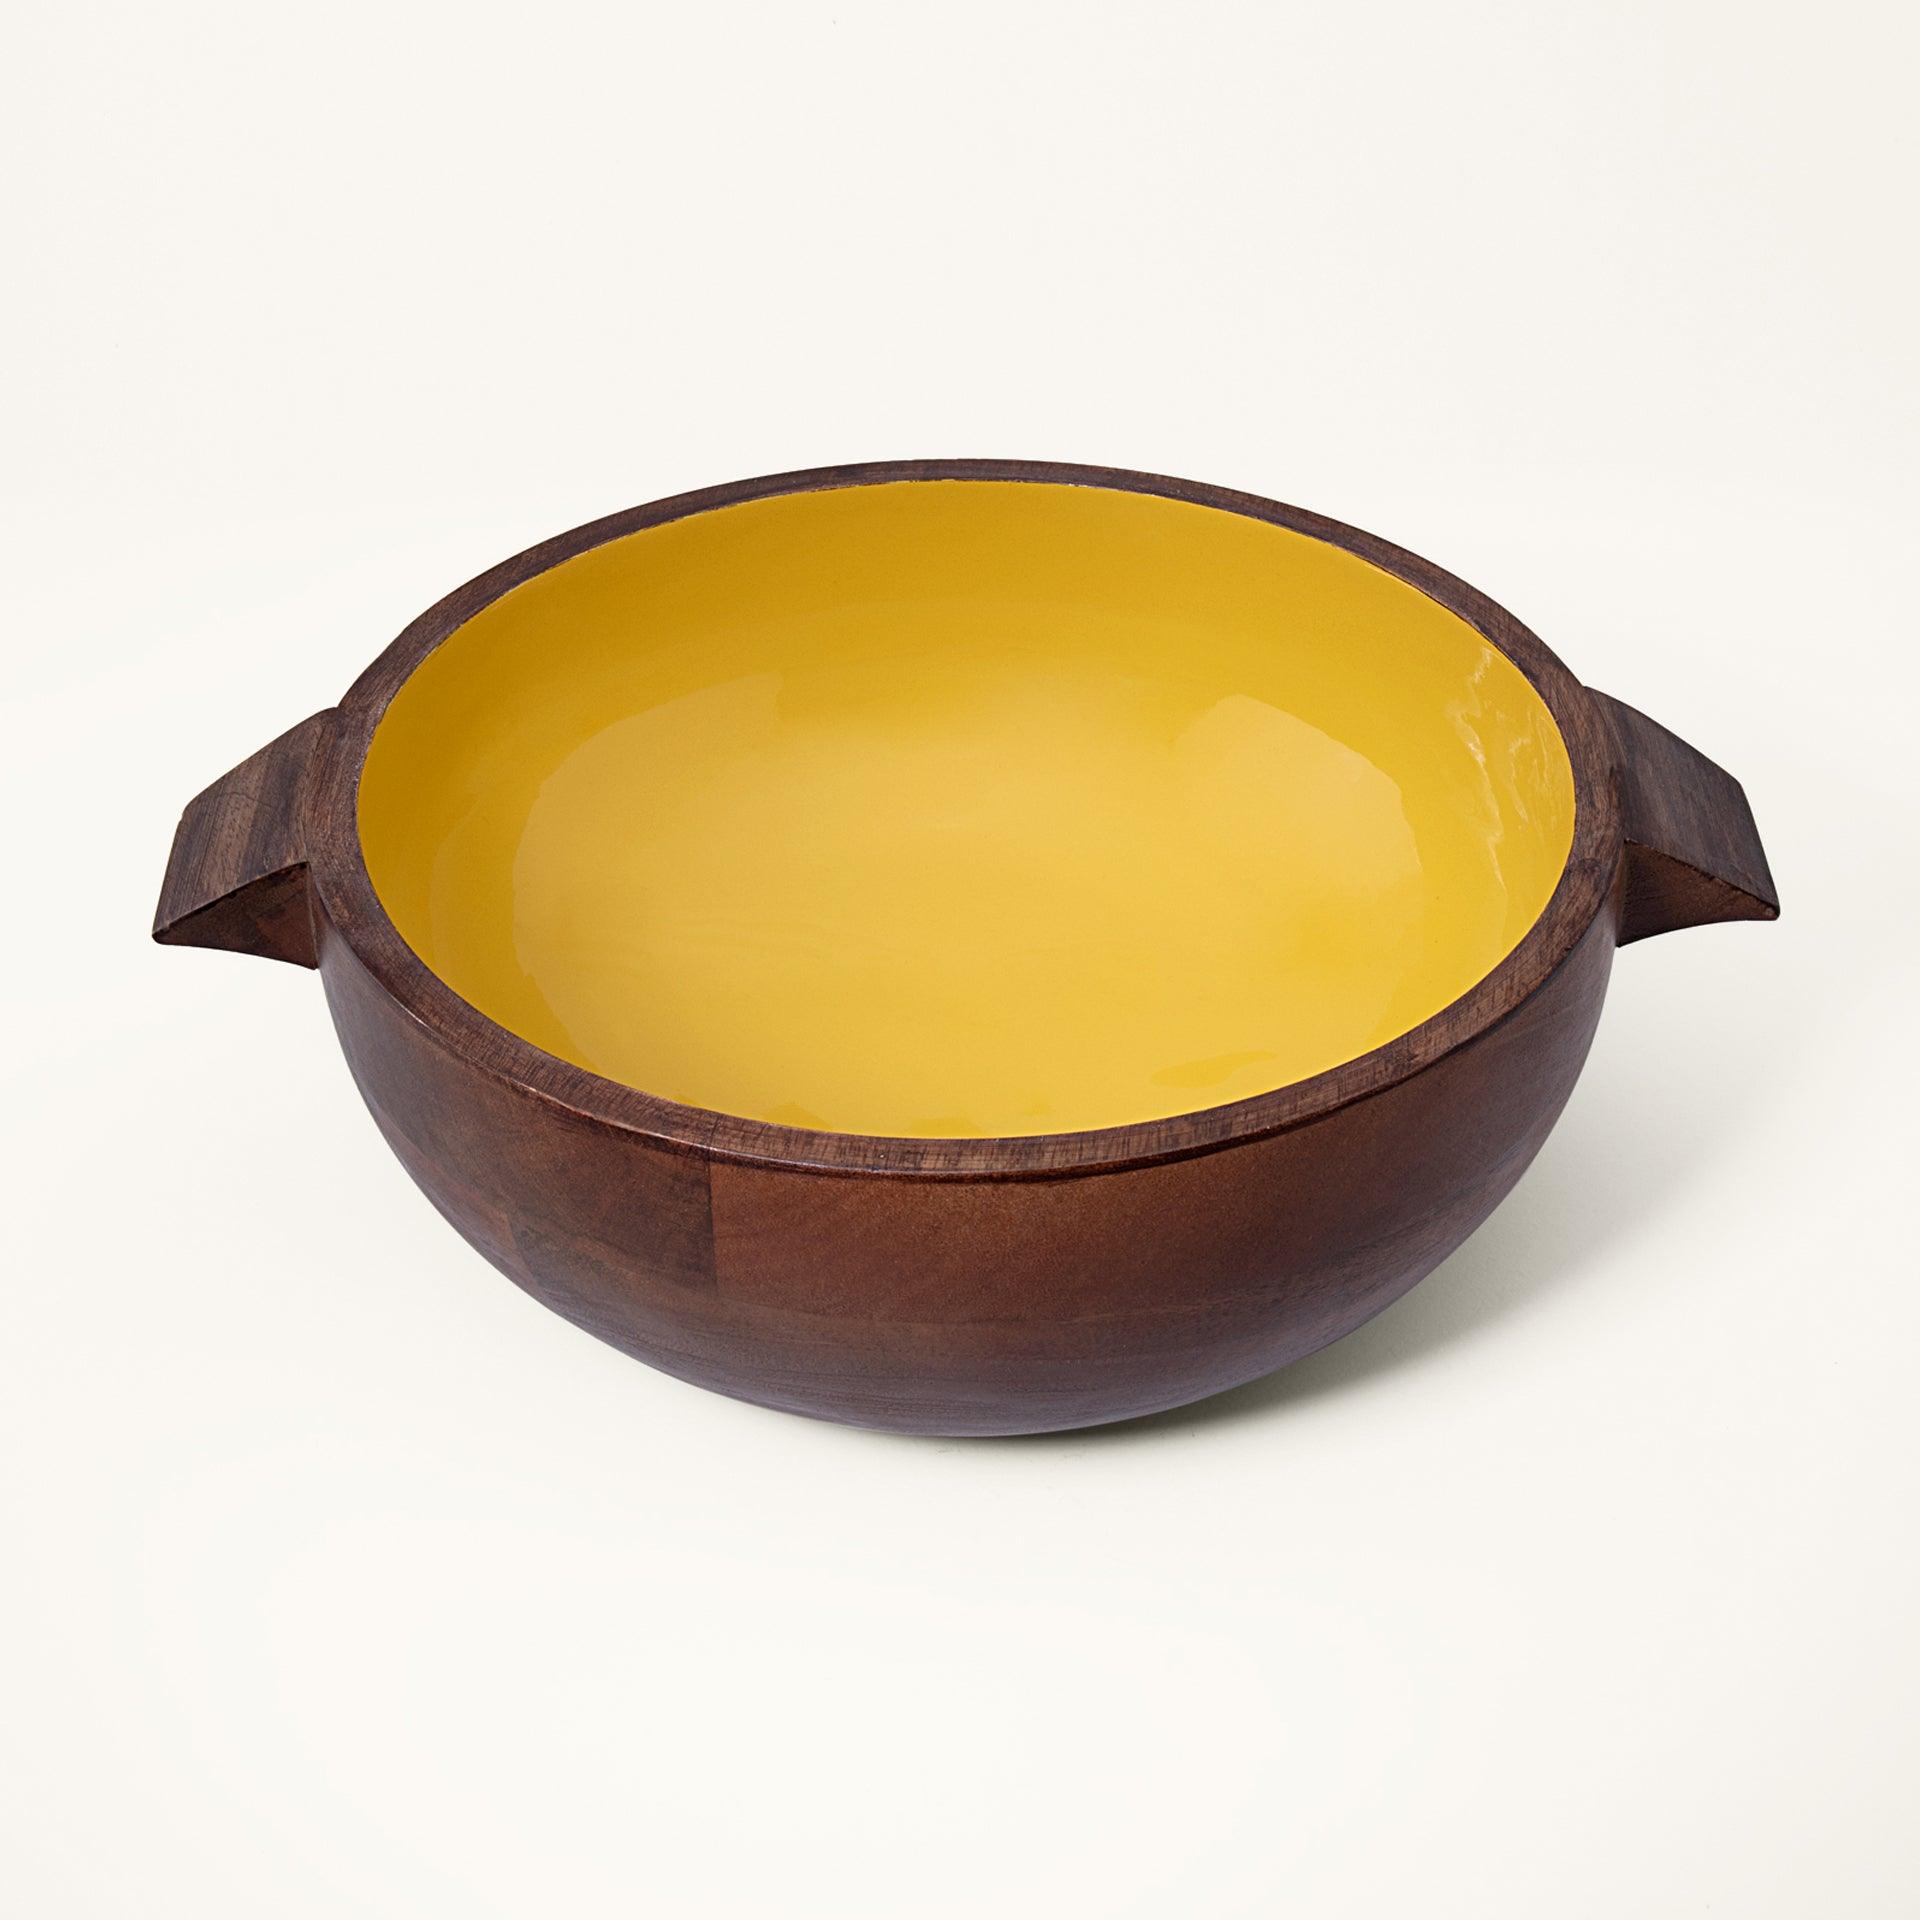 yellow orchard serving bowl with handles- large